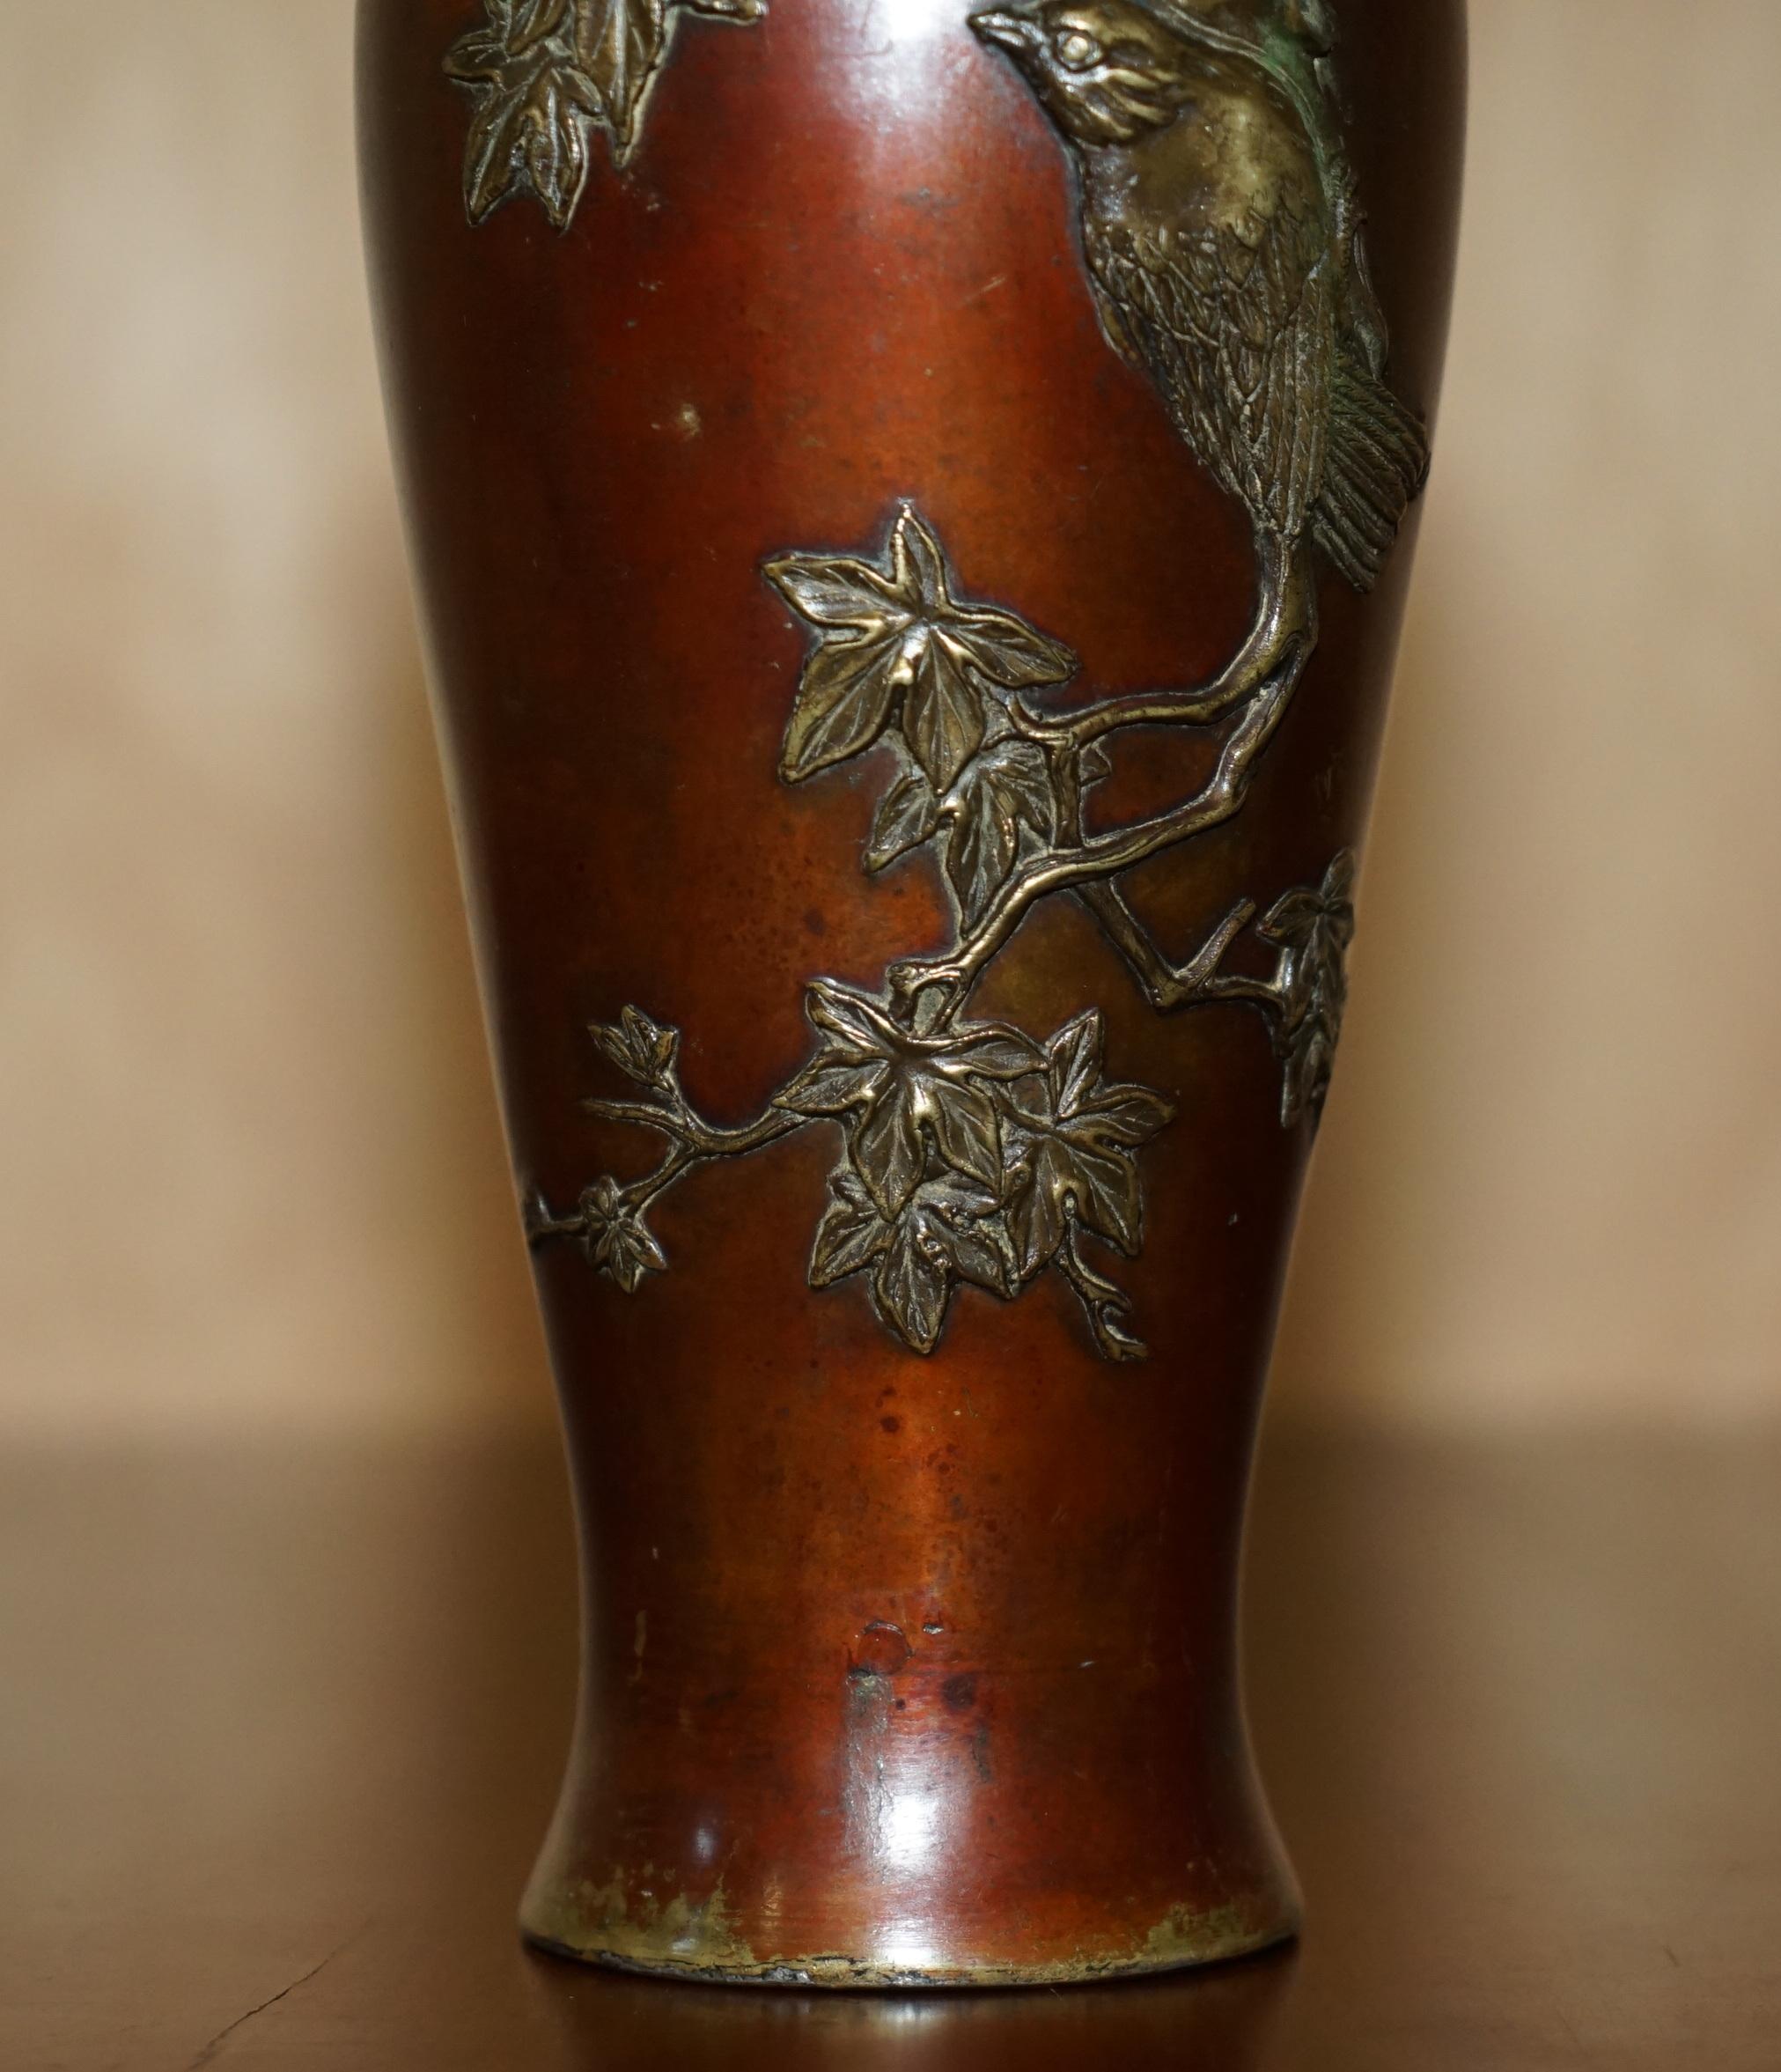 Japonisme STUNNING SiGNED ANTIQUE CIRCA 1870 JAPANESE VASE DEPICTING A BIRD ON A BRANCH For Sale